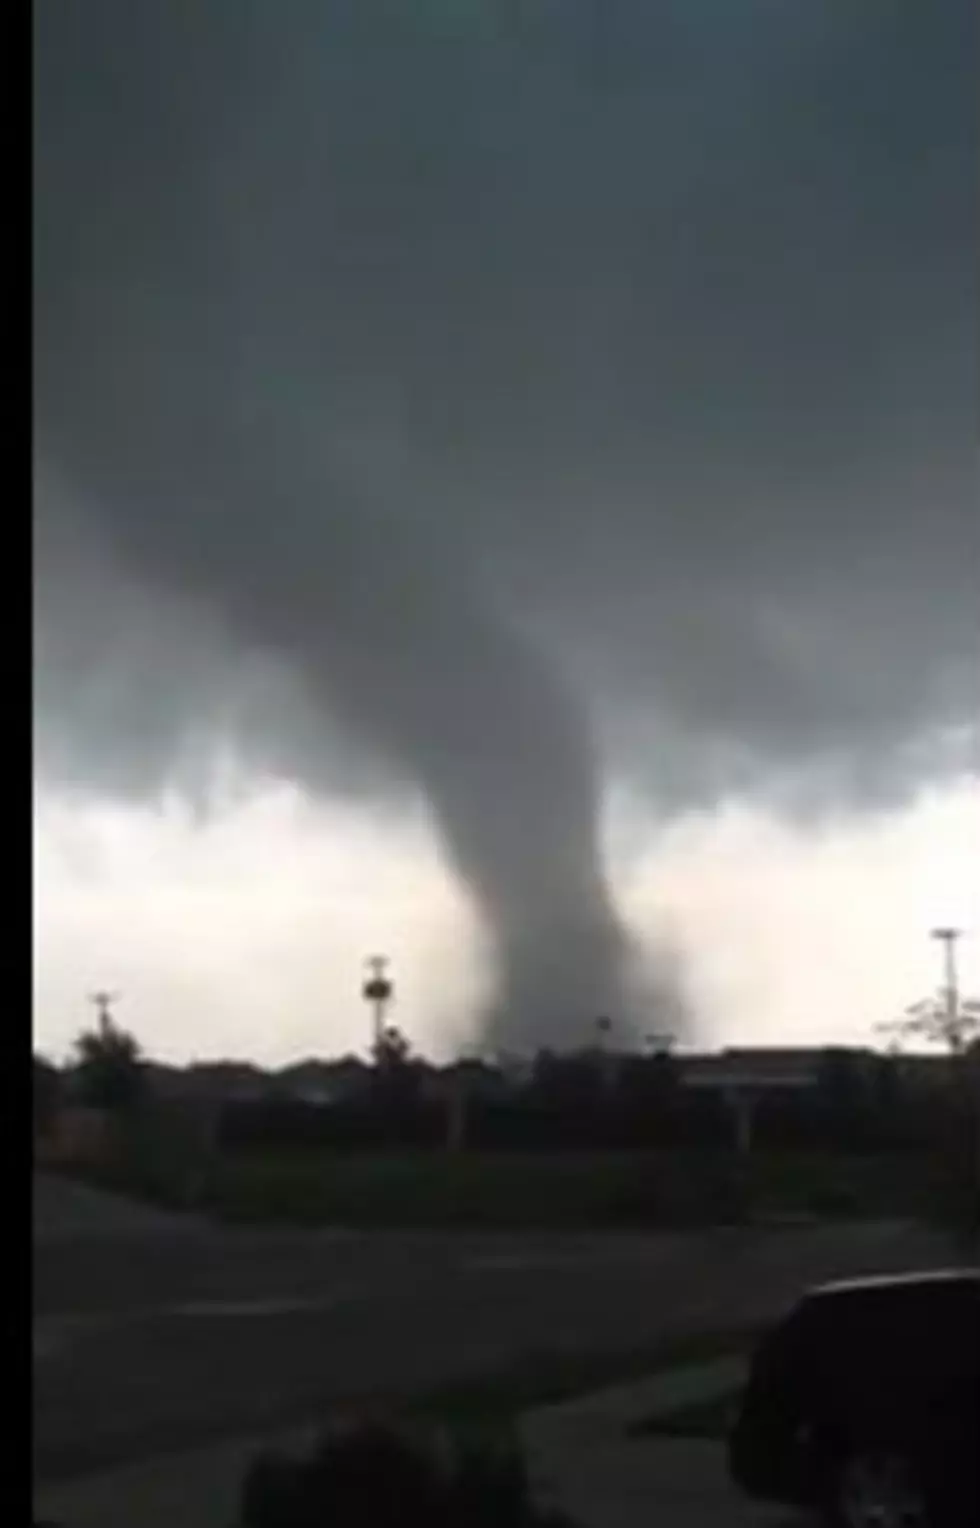 Dallas Tornadoes Like a Scene From a Movie [Video]